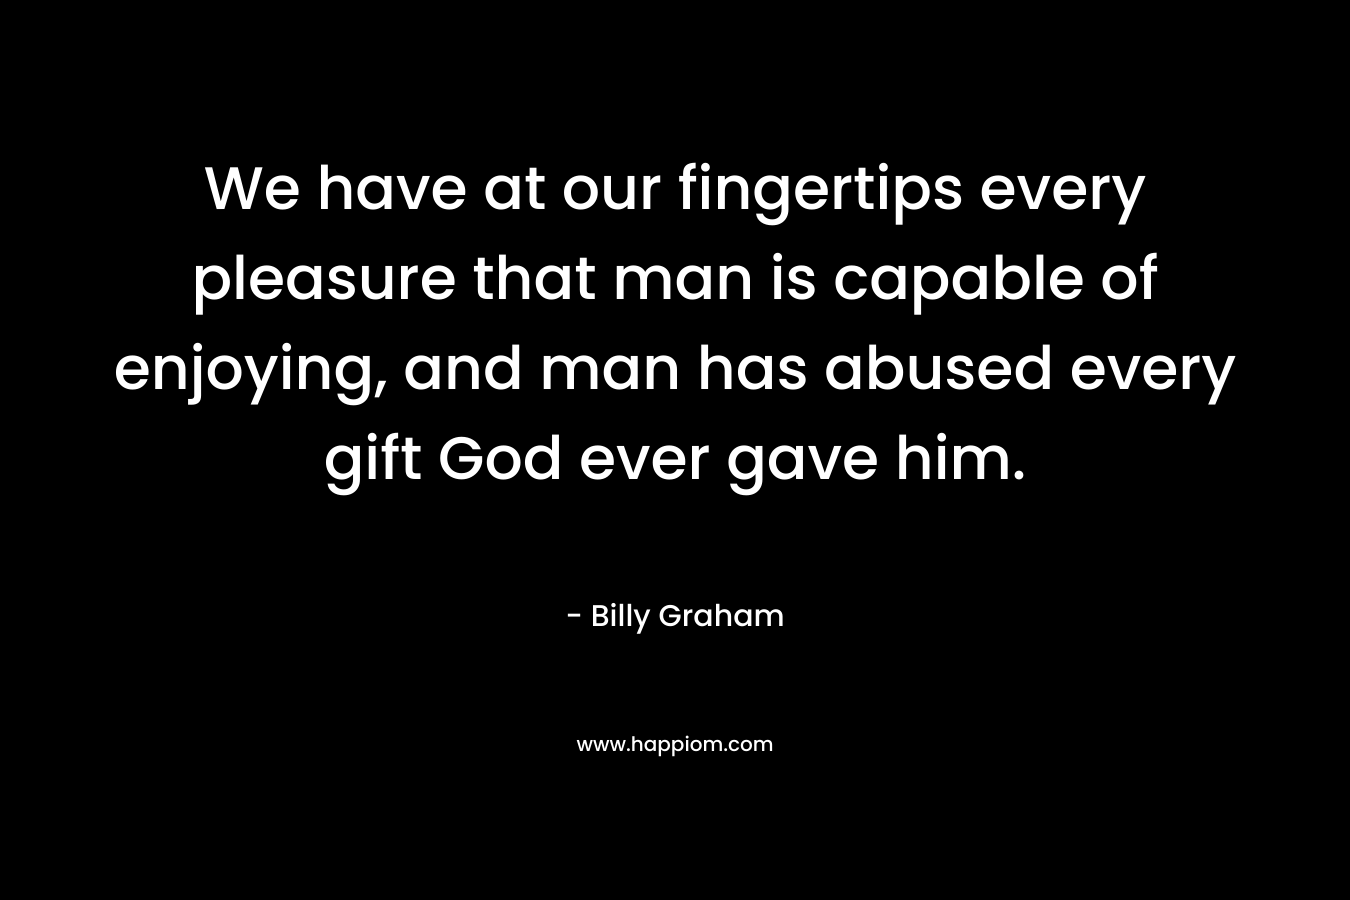 We have at our fingertips every pleasure that man is capable of enjoying, and man has abused every gift God ever gave him.